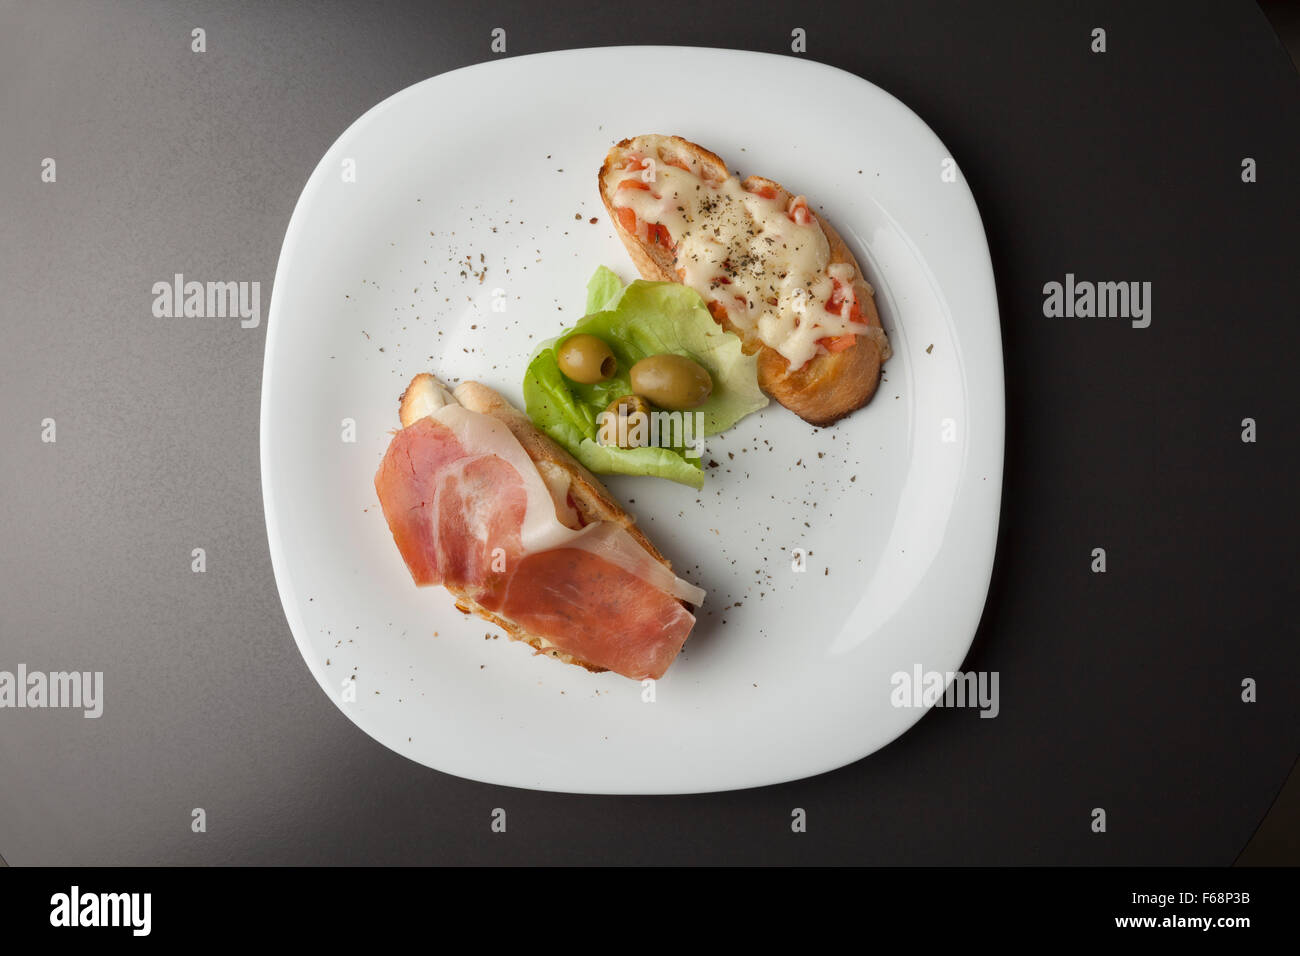 sandwiches, baked with prosciutto and cheese on white plate Stock Photo